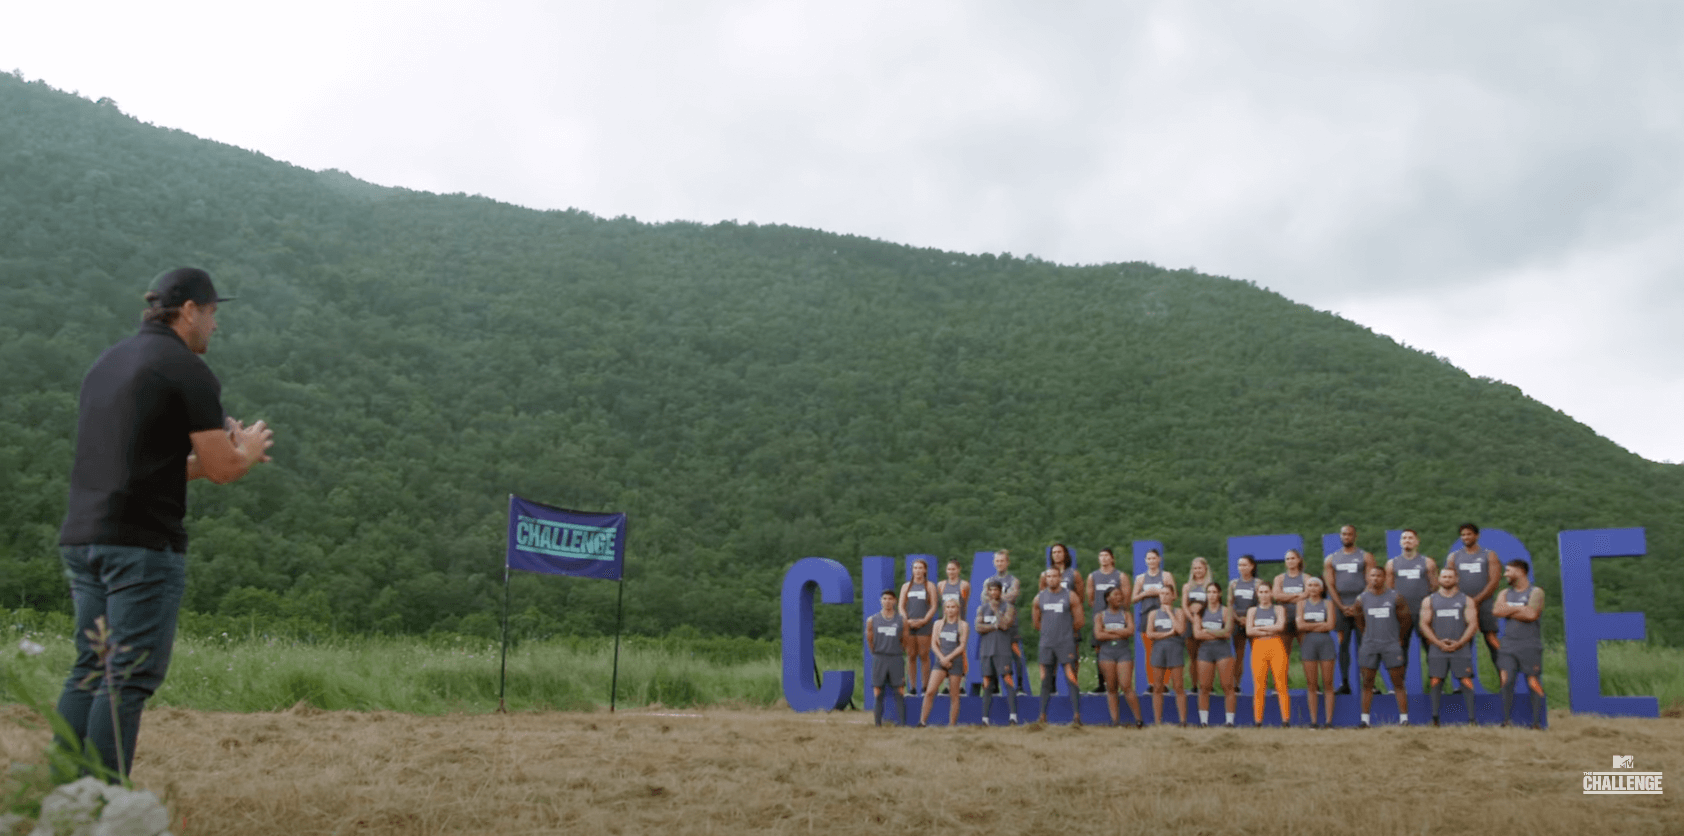 T.J. Lavin talking to 'The Challenge' Season 39 cast about the format and twists of the season while they stand in front of 'The Challenge' sign